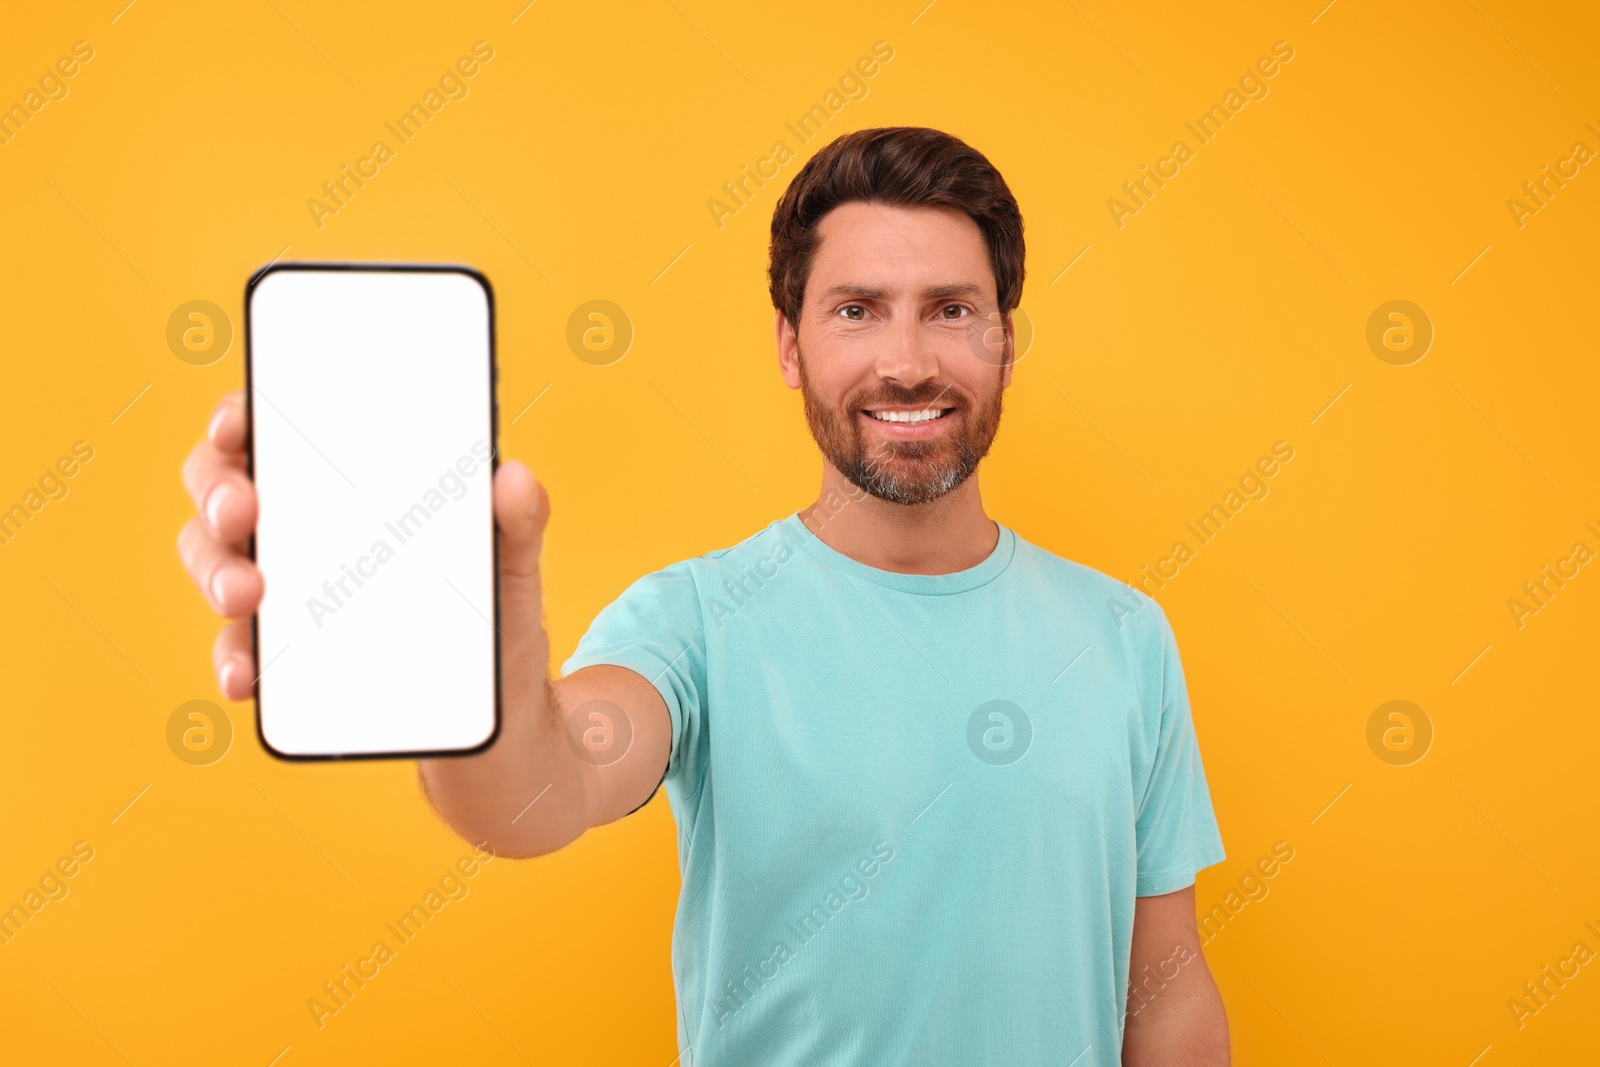 Photo of Handsome man showing smartphone in hand on yellow background